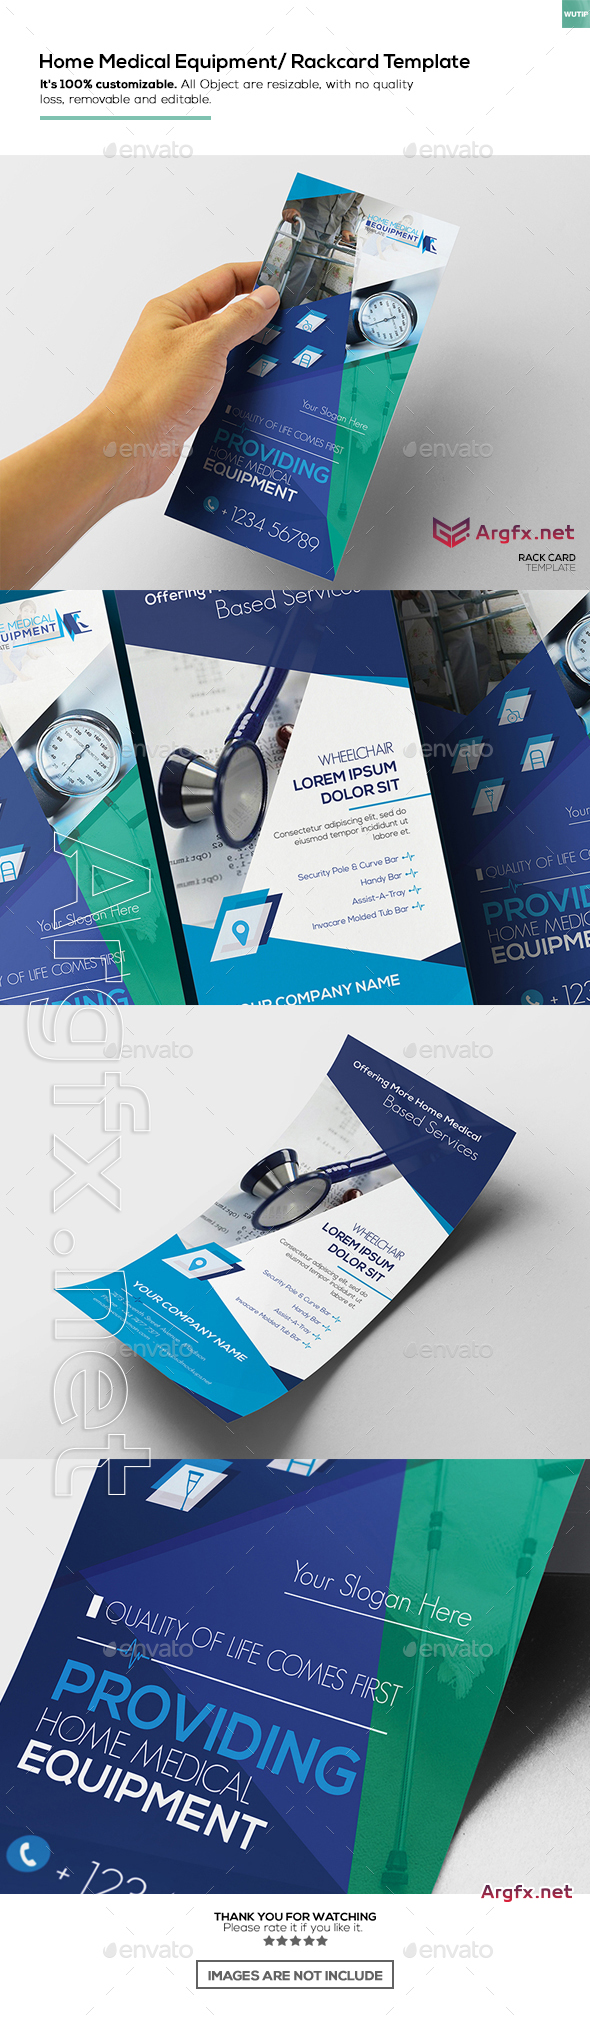 GraphicRiver - Home Medical Equipment/ Rackcard Template 16895897